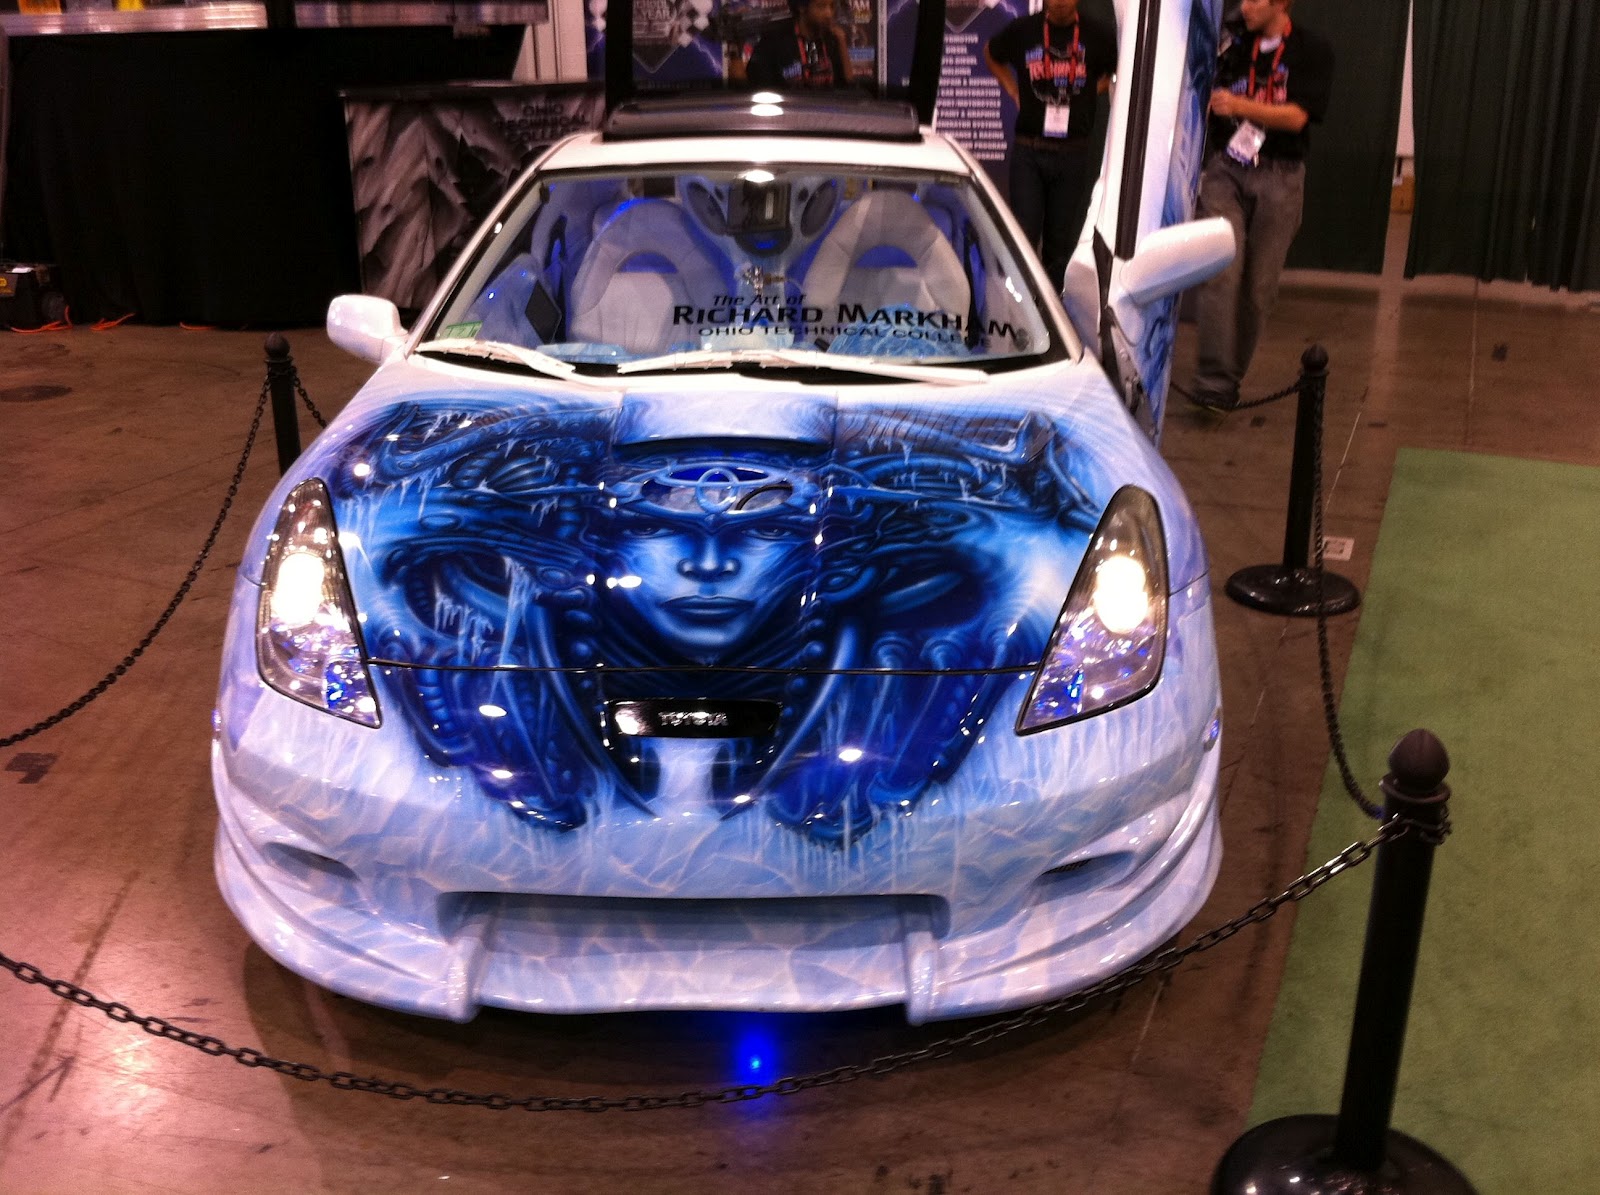 posted by marisa horn labels airbrush auto car art